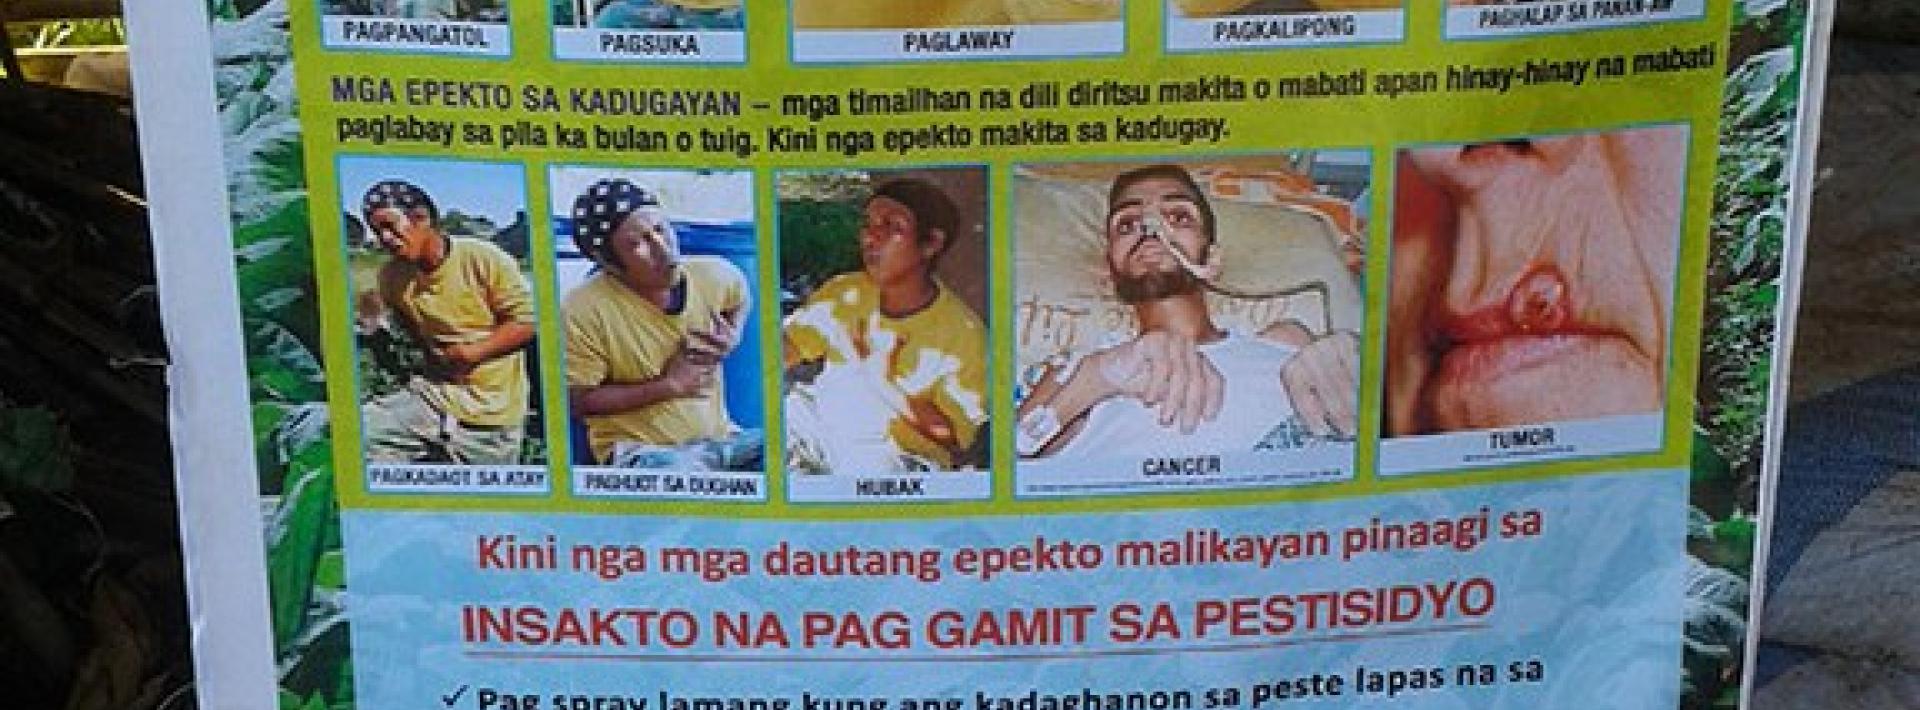 Images of women absent from posters on safe tobacco growing